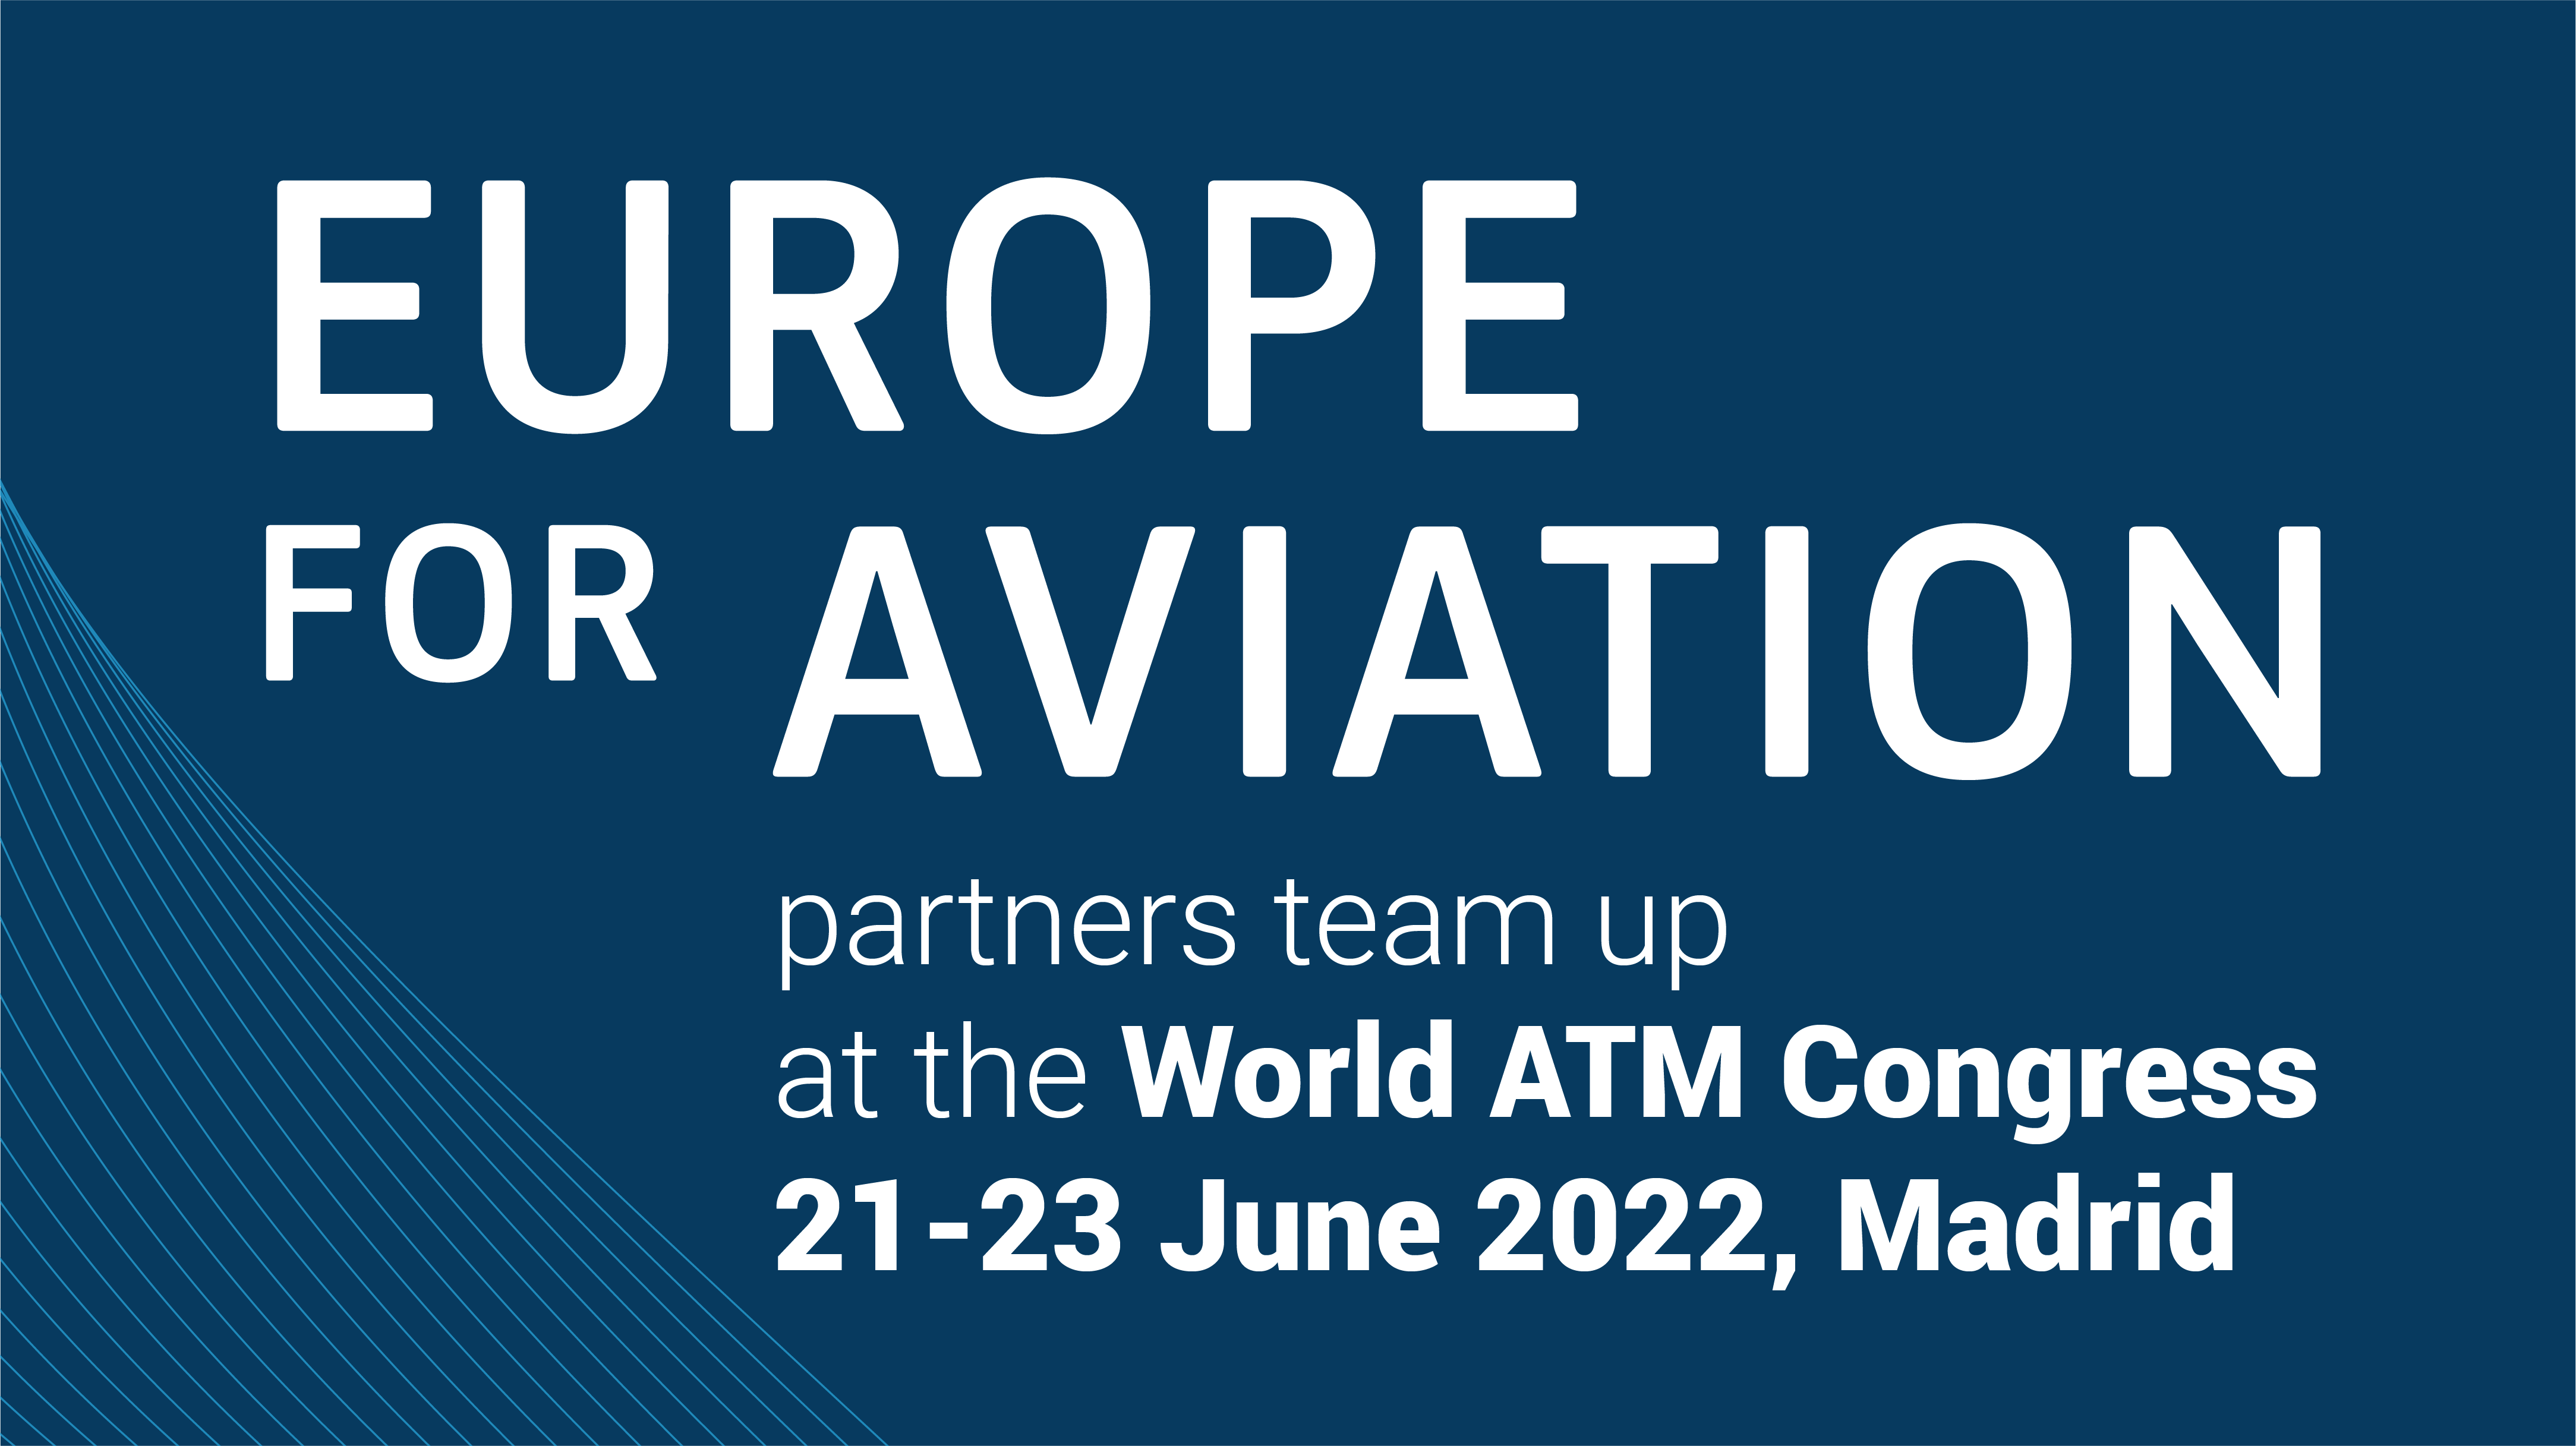 “Europe for Aviation” is back at the 2022 World ATM Congress